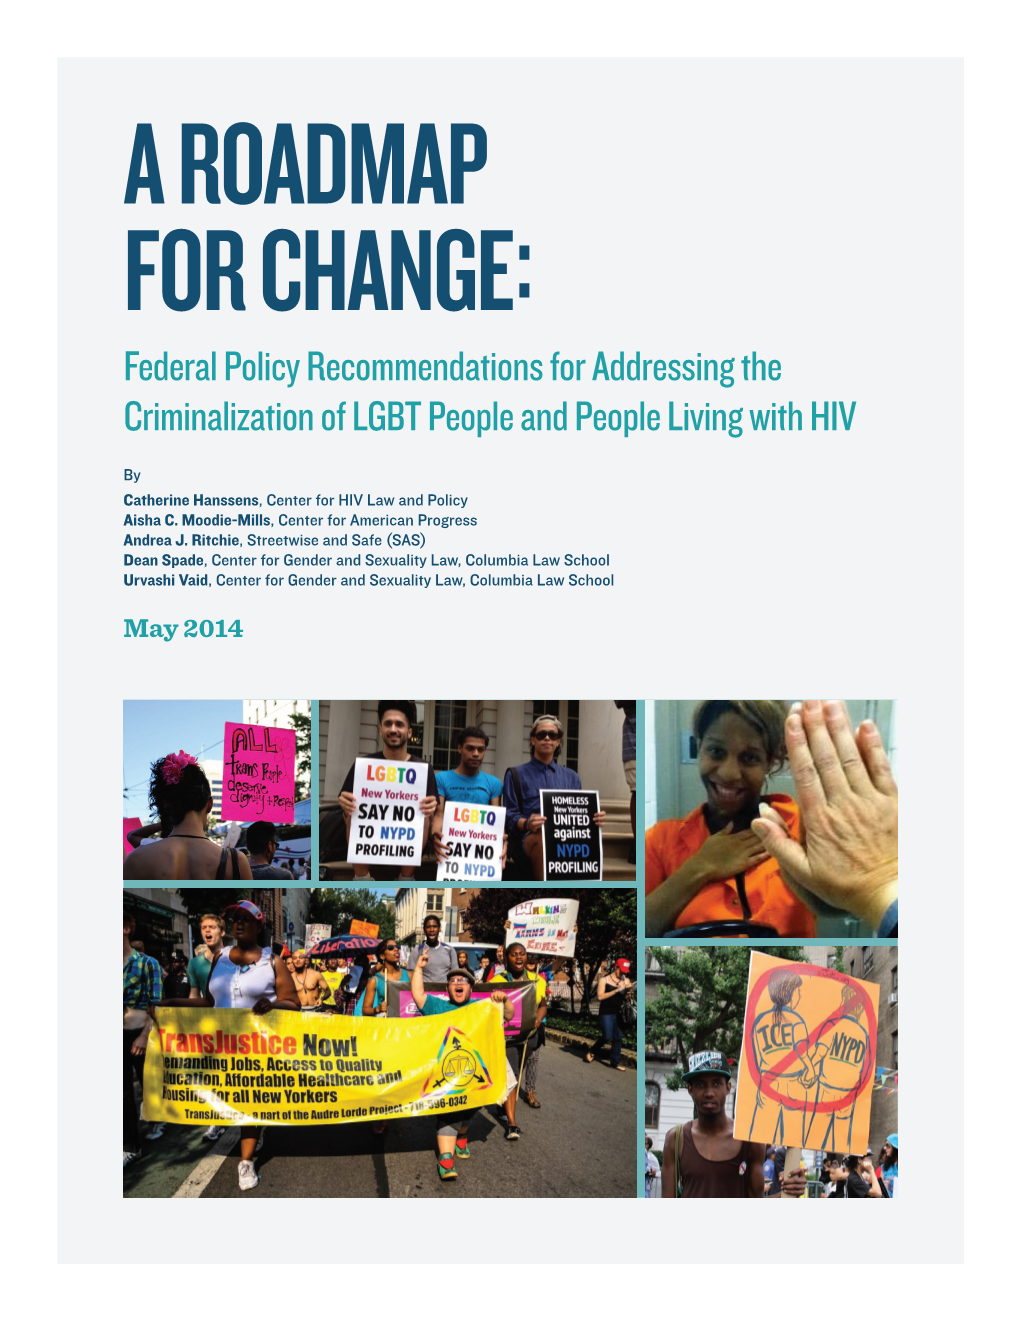 A Roadmap for Change: Federal Policy Recommendations for Addressing the Criminalization of LGBT People and People Living with HIV